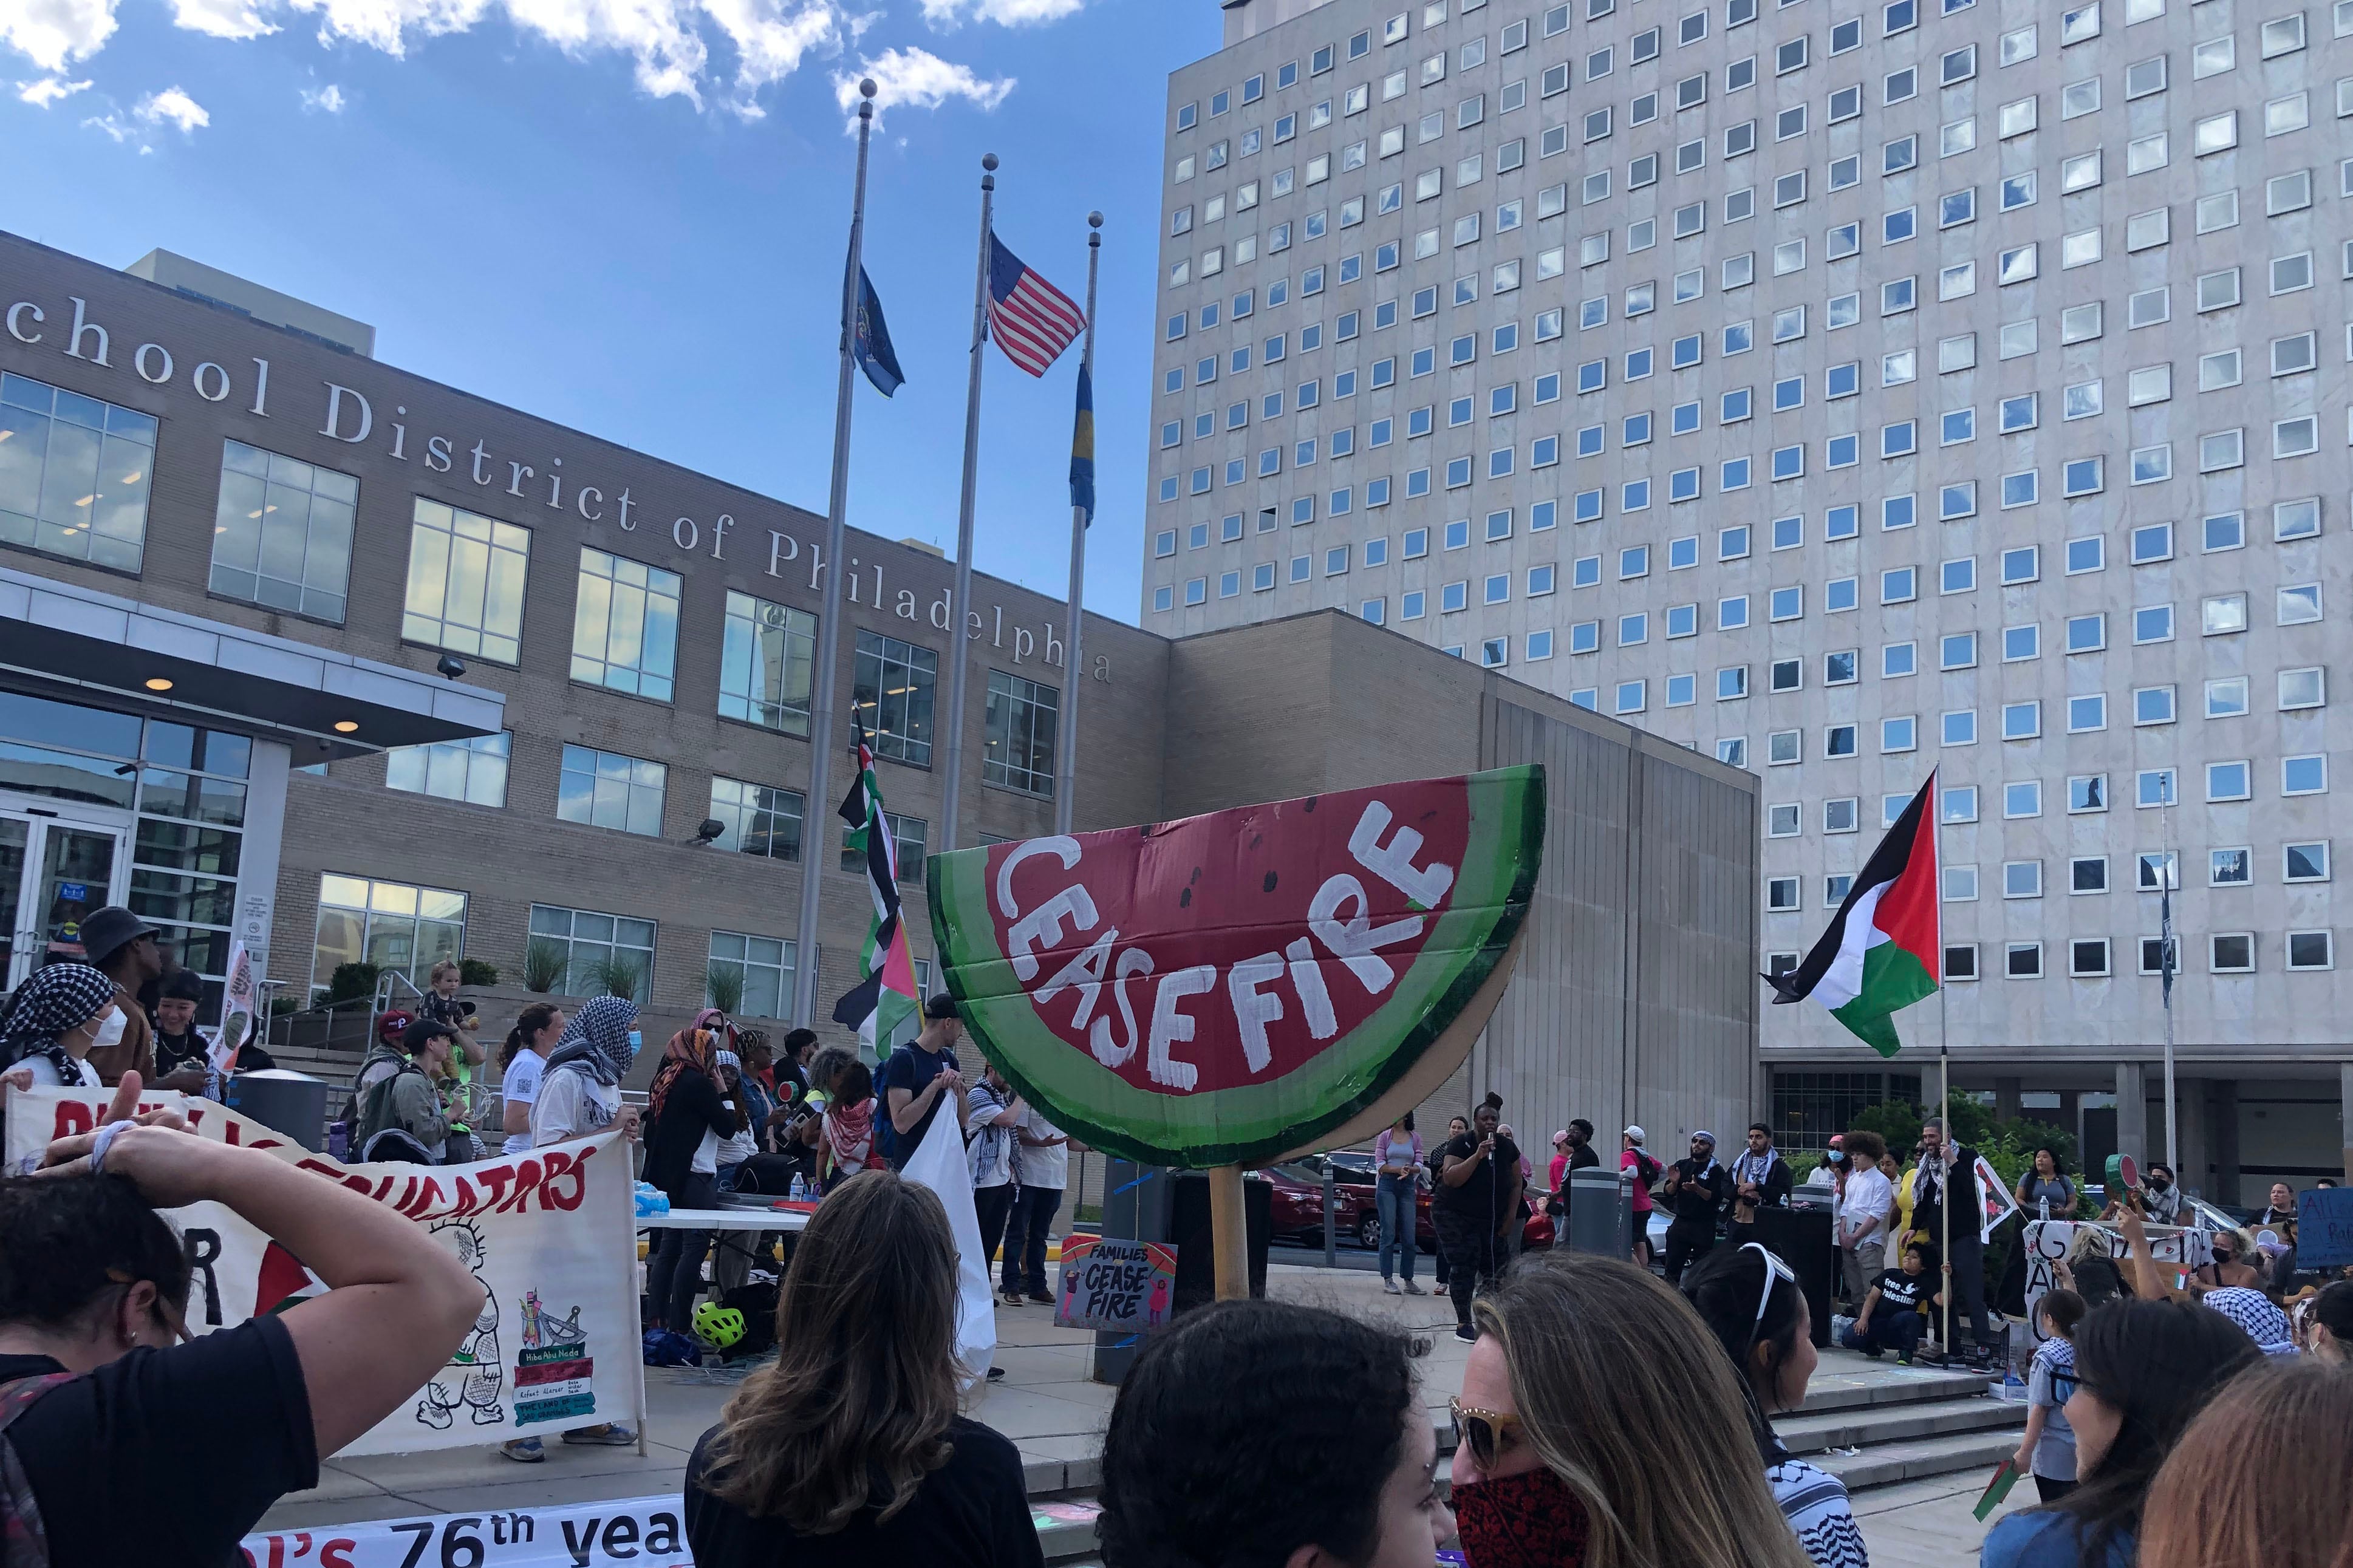 A large group of people protest outside a large stone building. Some people are wearing keffiyehs, holding signs and Palestinian flags.